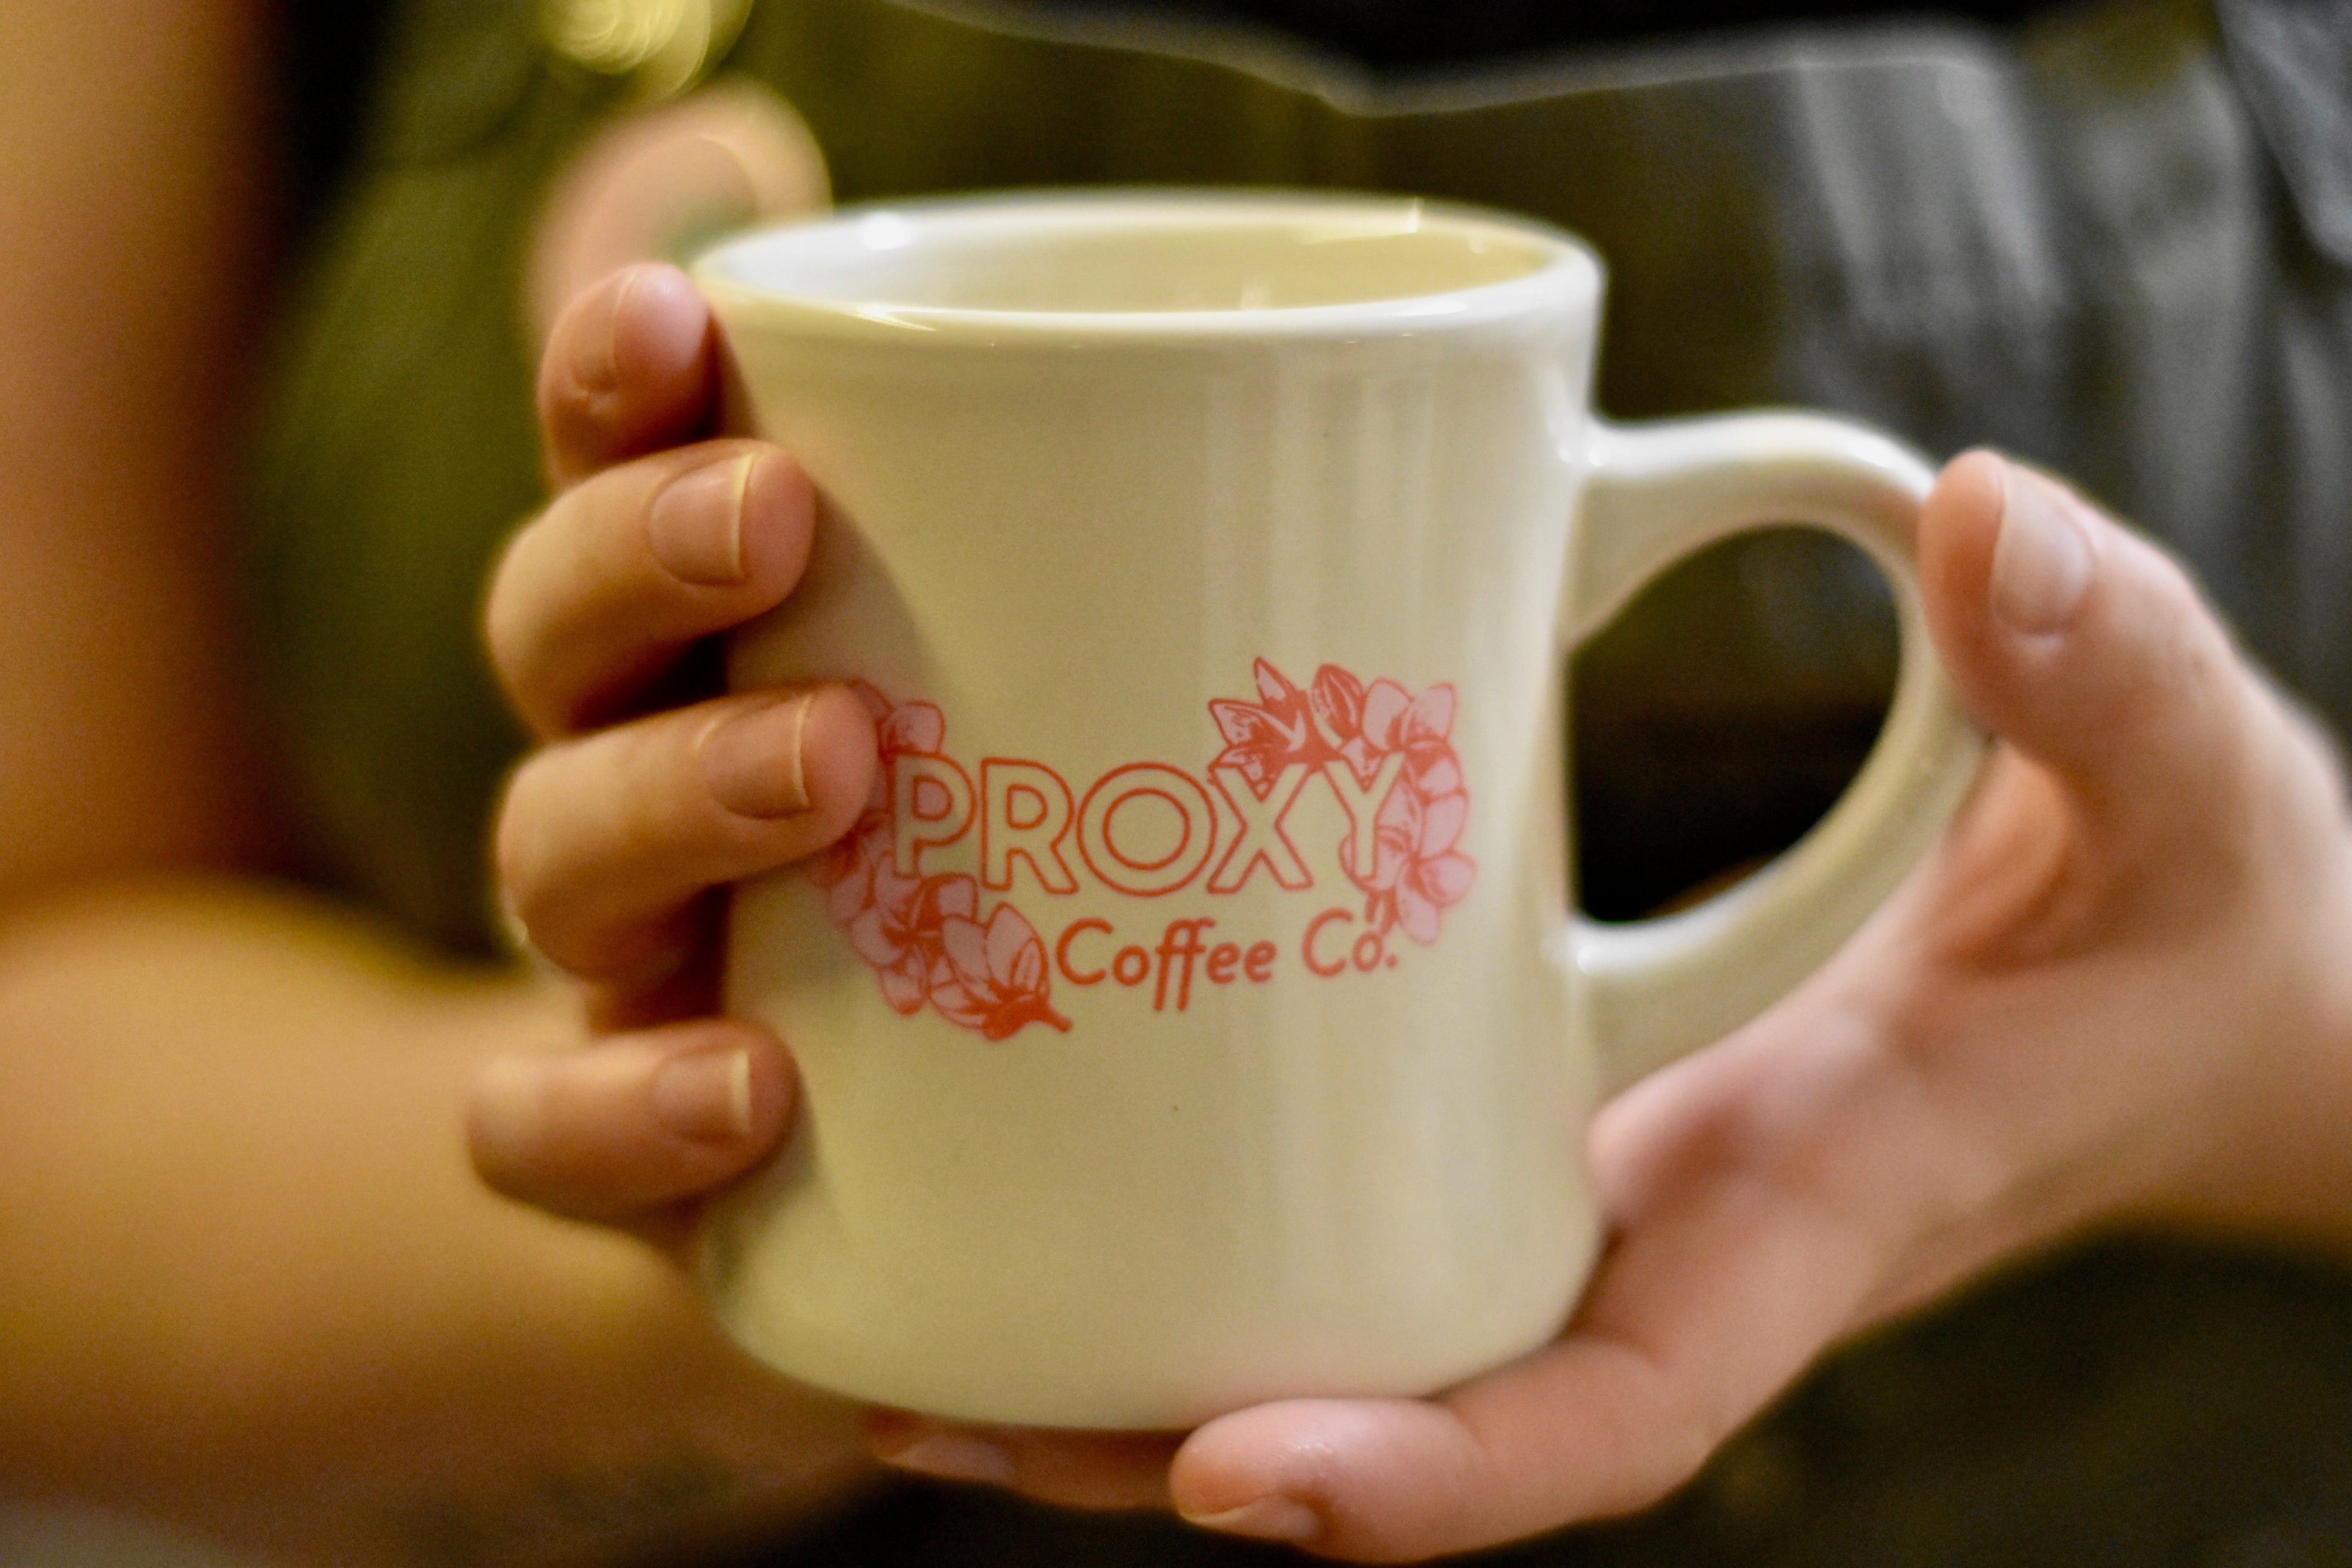 Close up photograph of a person's hands holding a white, diner-style coffee mug with the words "Proxy Coffee Co." and images of plumeria flowers printed on the mug in pink.